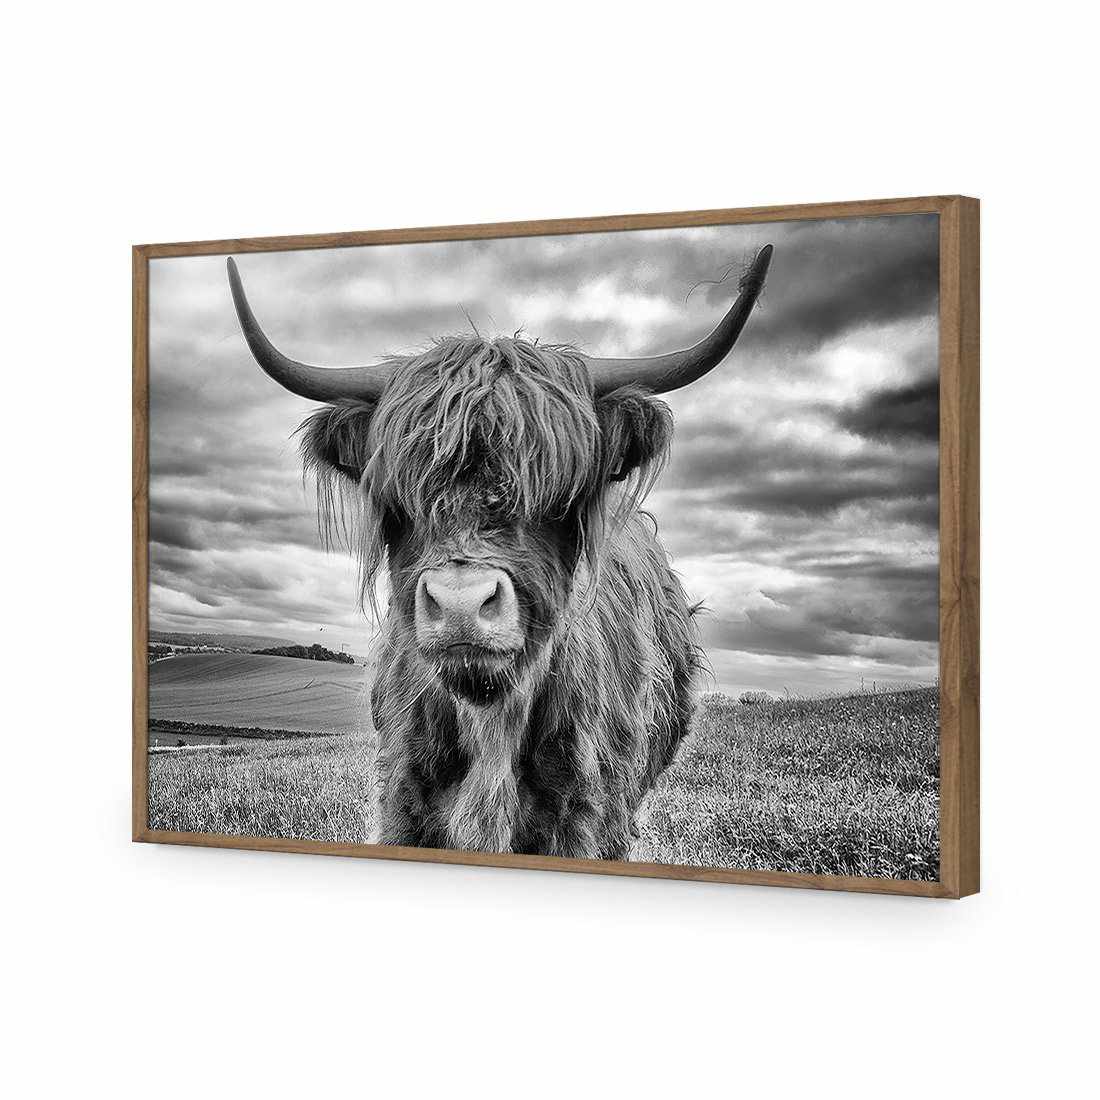 Stormy the Highland Acrylic Glass Art-Acrylic-Wall Art Designs-Without Border-Acrylic - Natural Frame-45x30cm-Wall Art Designs